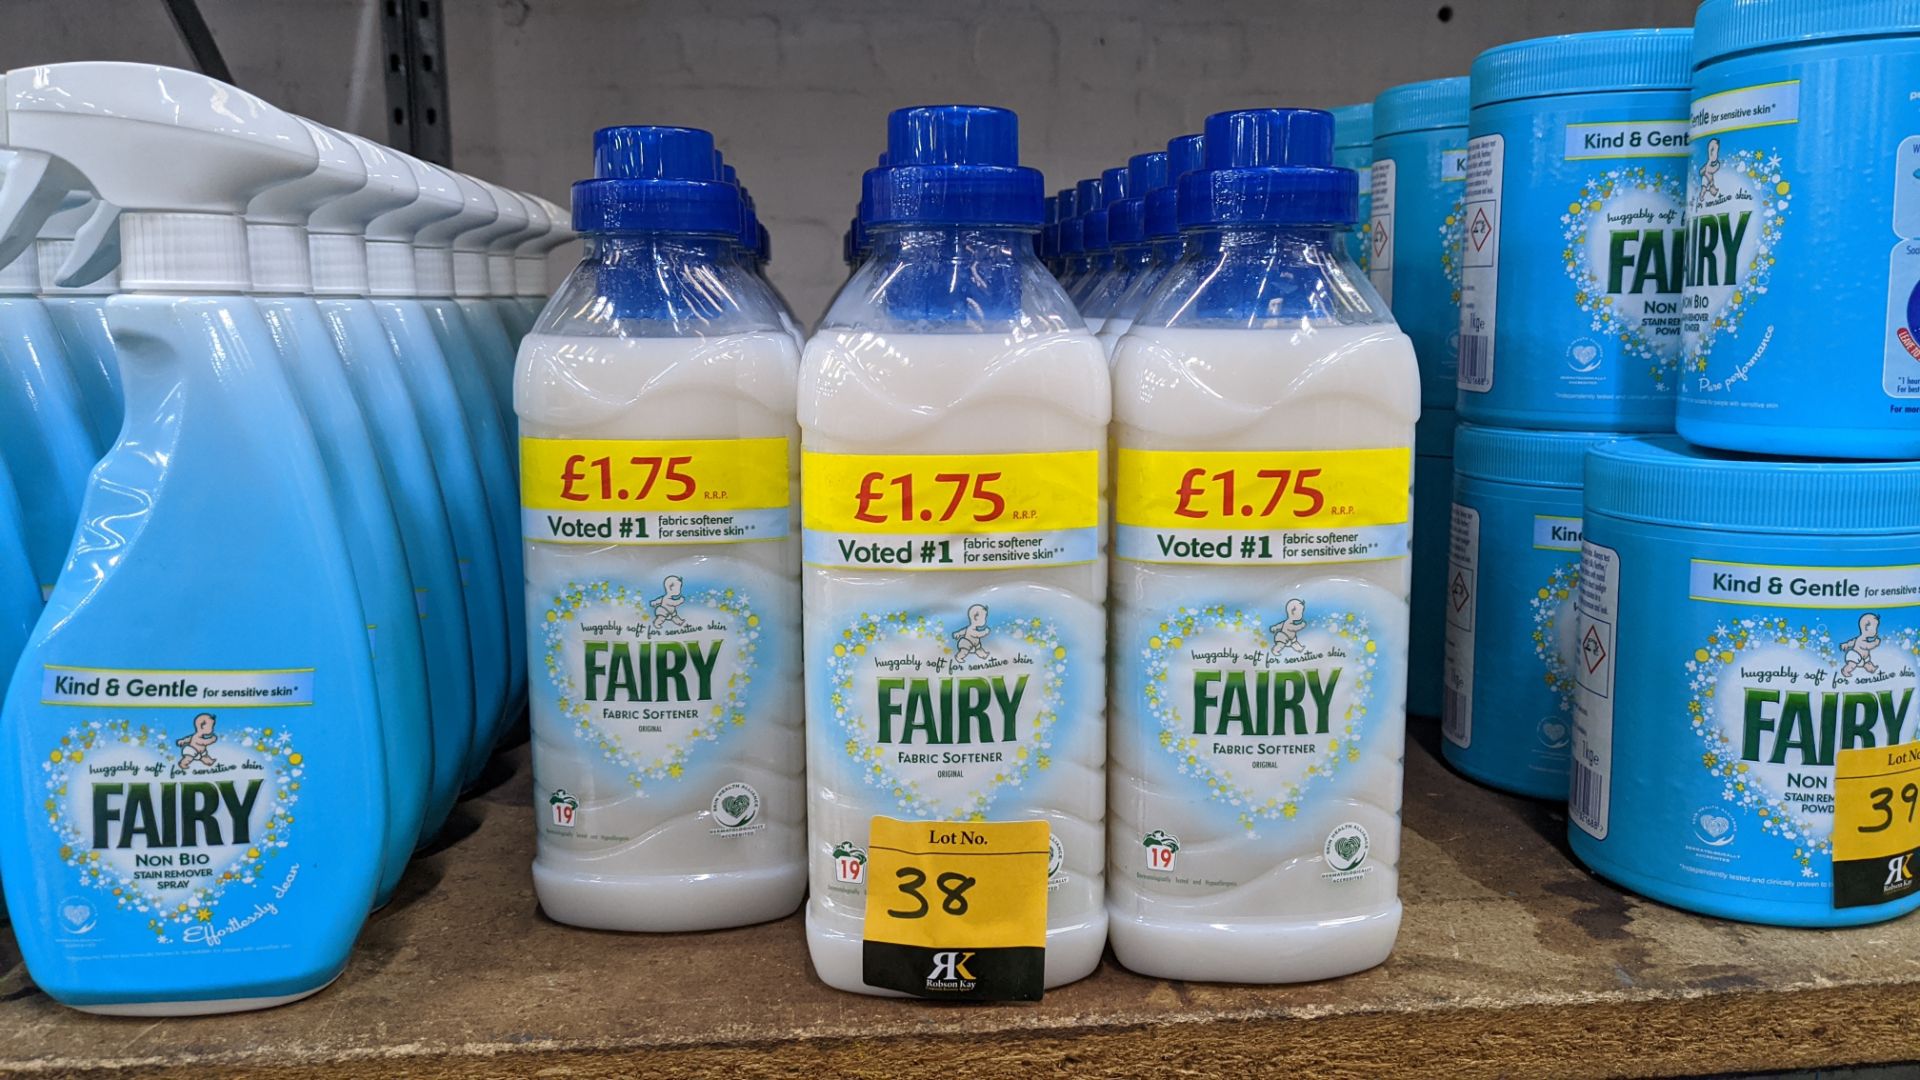 23 off 665ml bottles of Fairy fabric softener. IMPORTANT – DO NOT BID BEFORE READING THE IMPORTANT